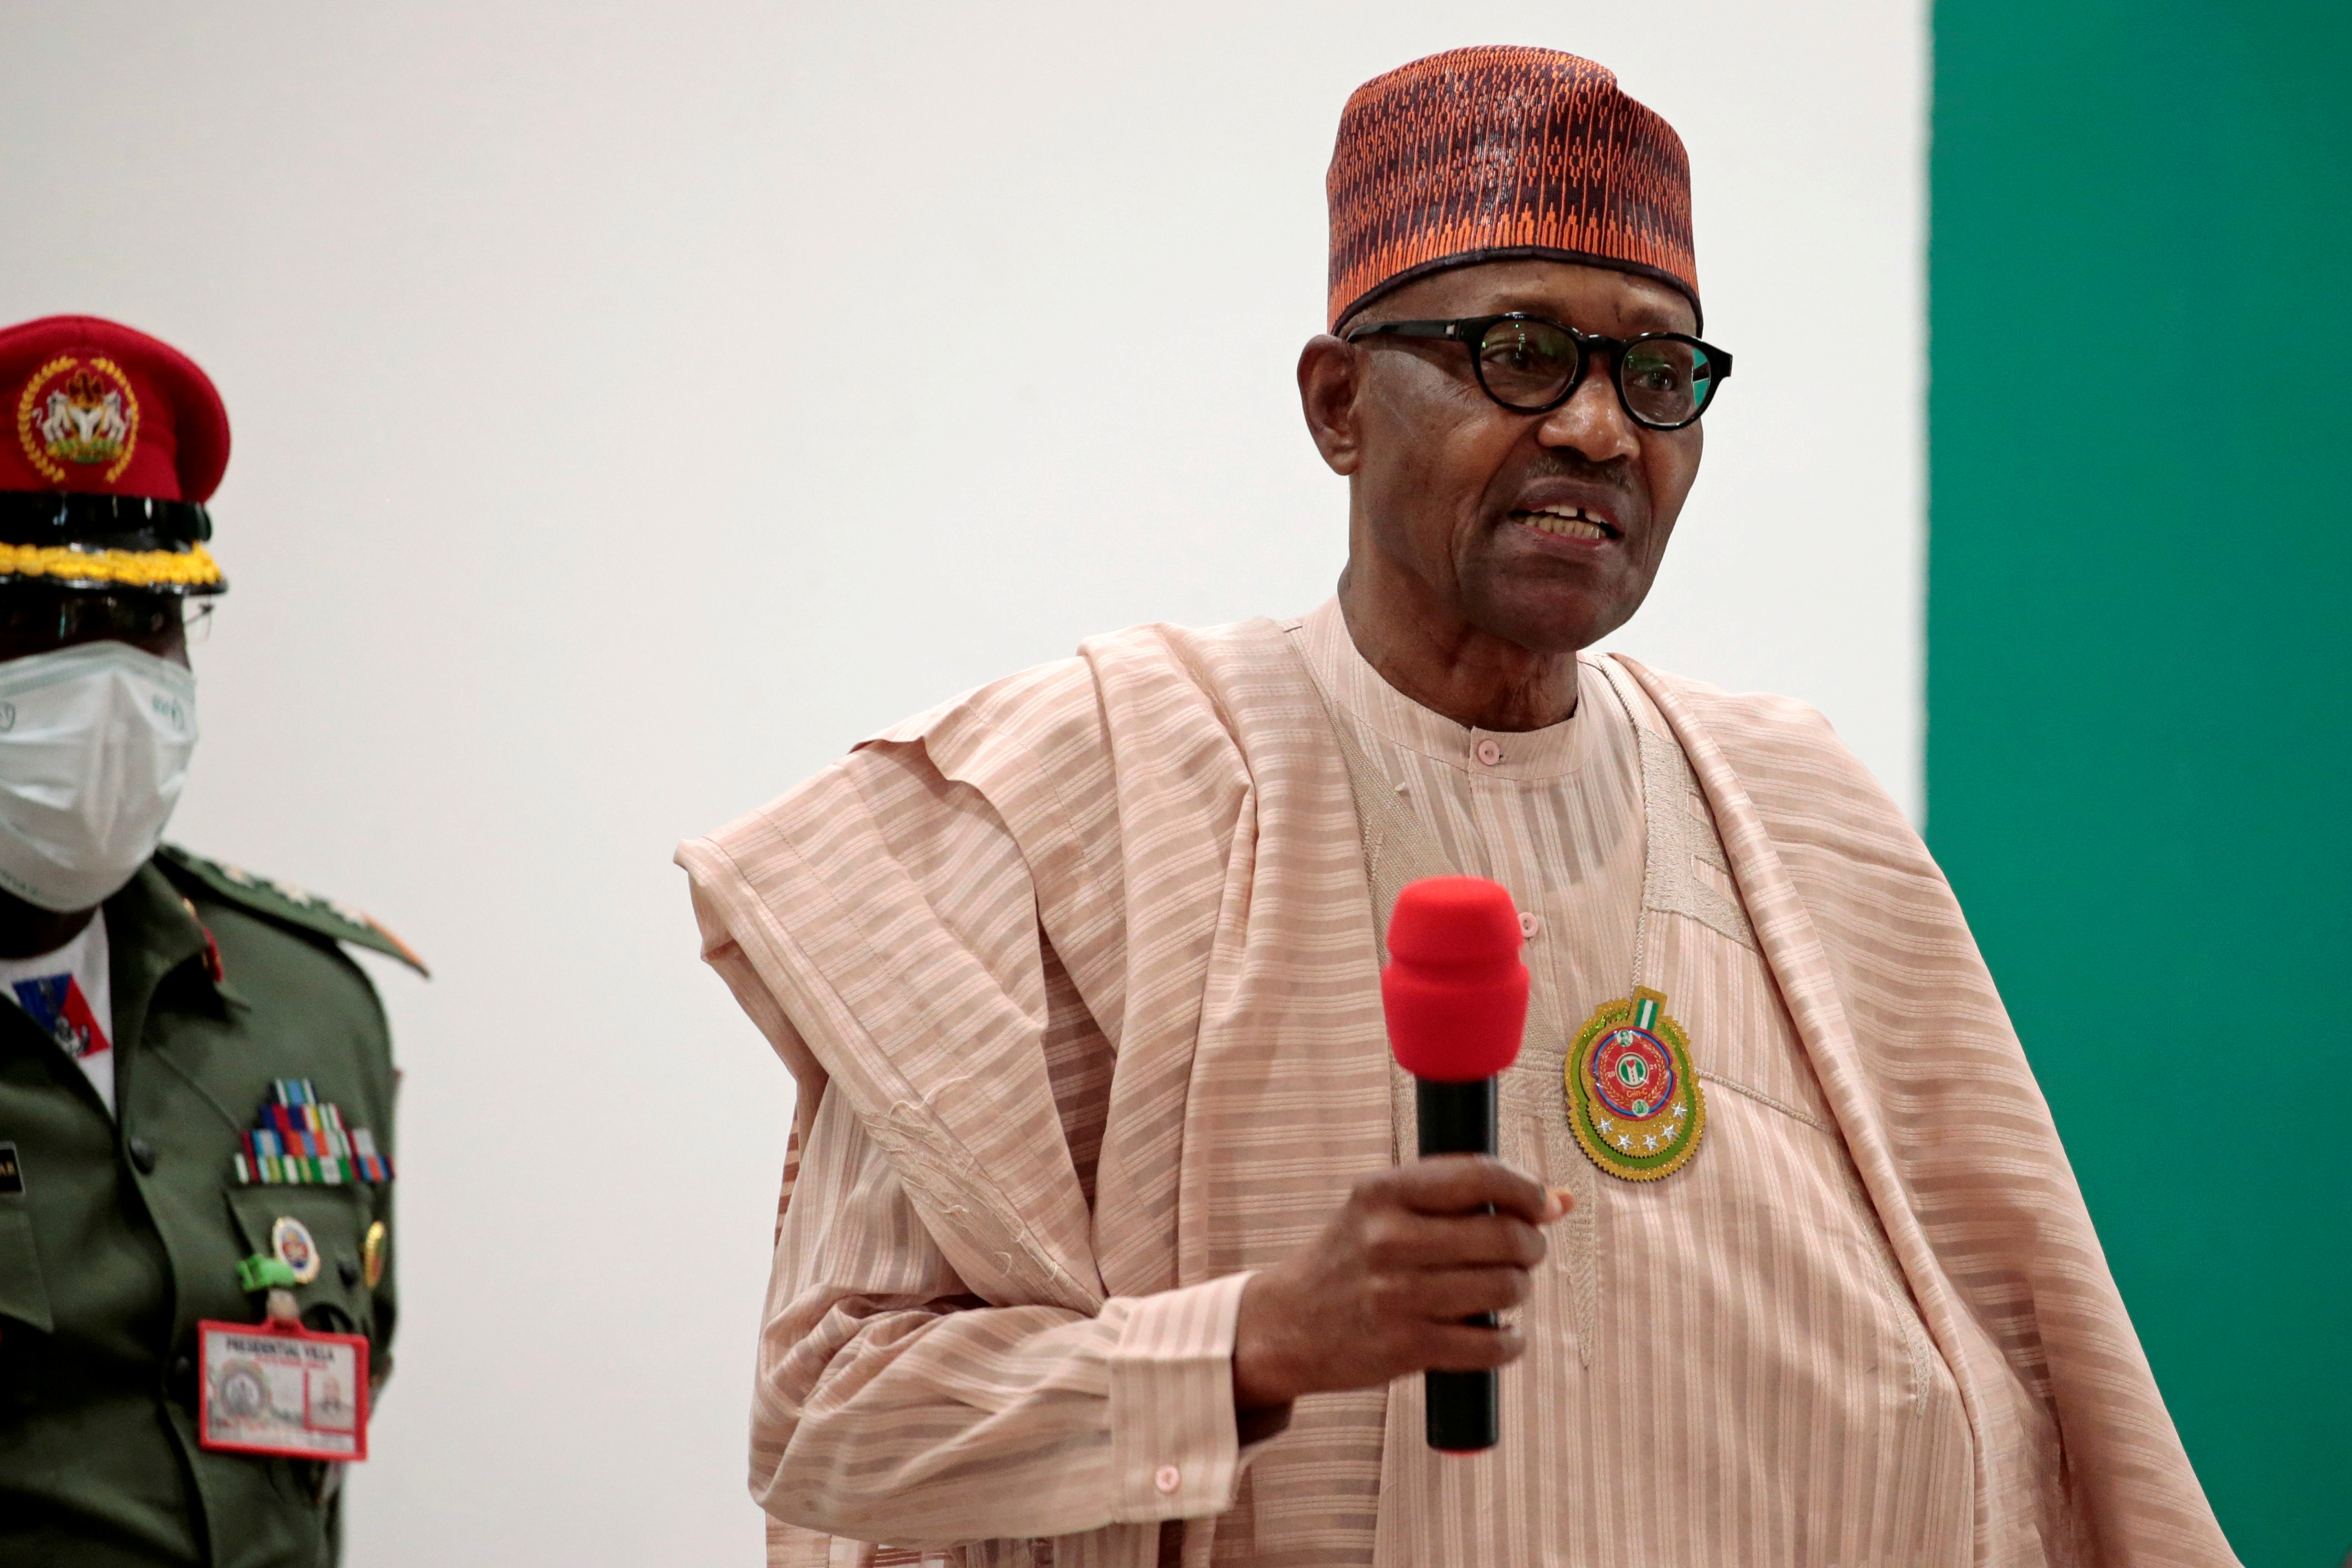 FILE PHOTO: Nigerian President Muhammadu Buhari speaks after security forces rescued schoolboys from kidnappers, in Katsina, Nigeria